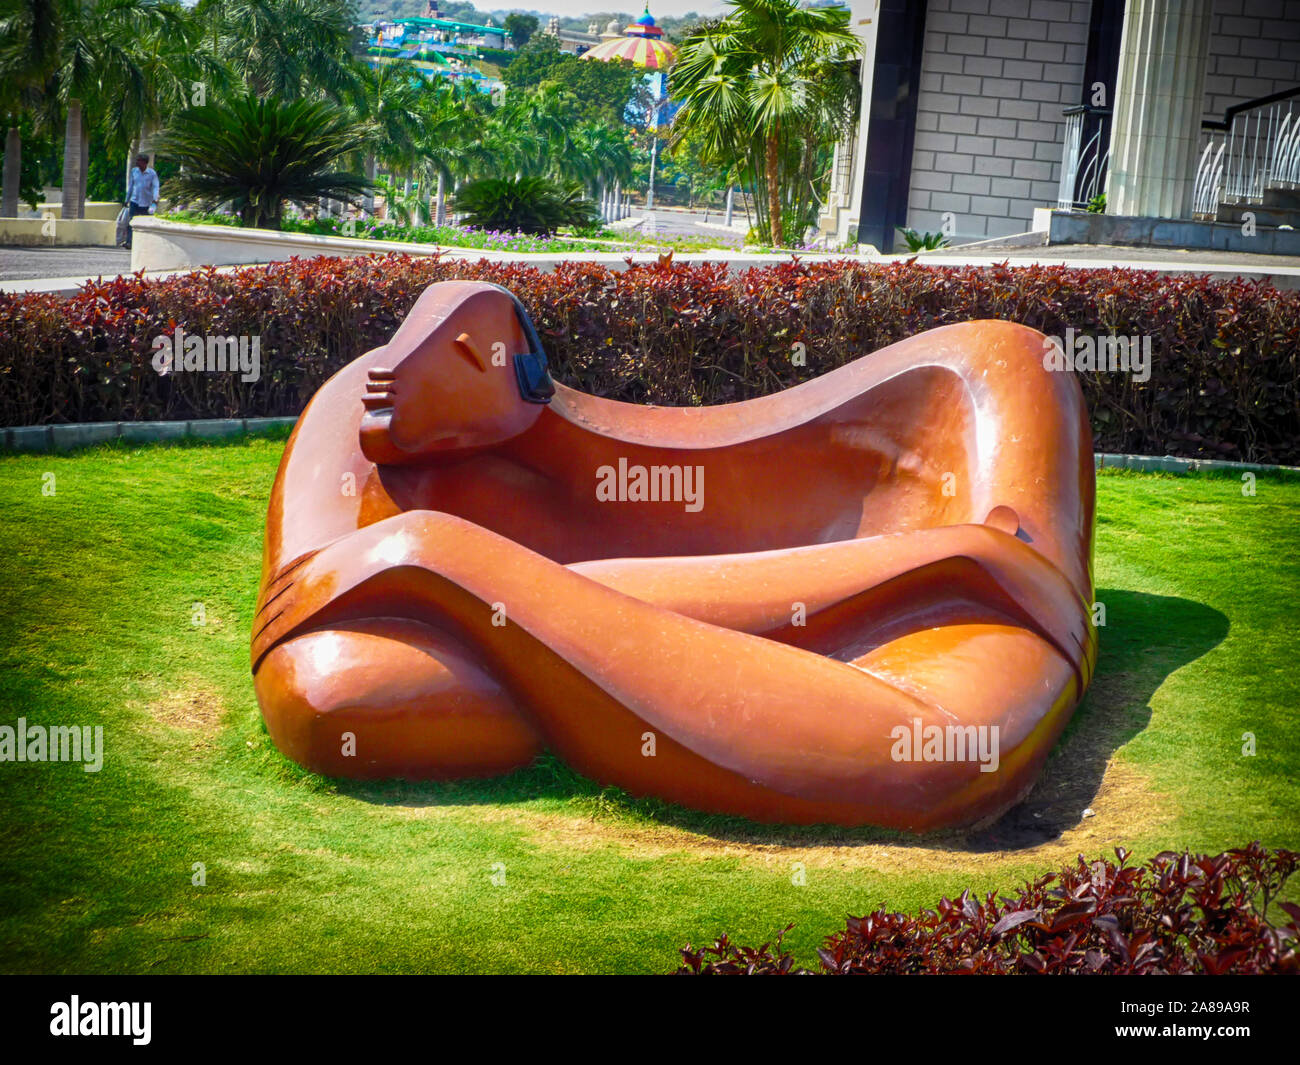 This photo shows a statue constructed with a funny design. Stock Photo